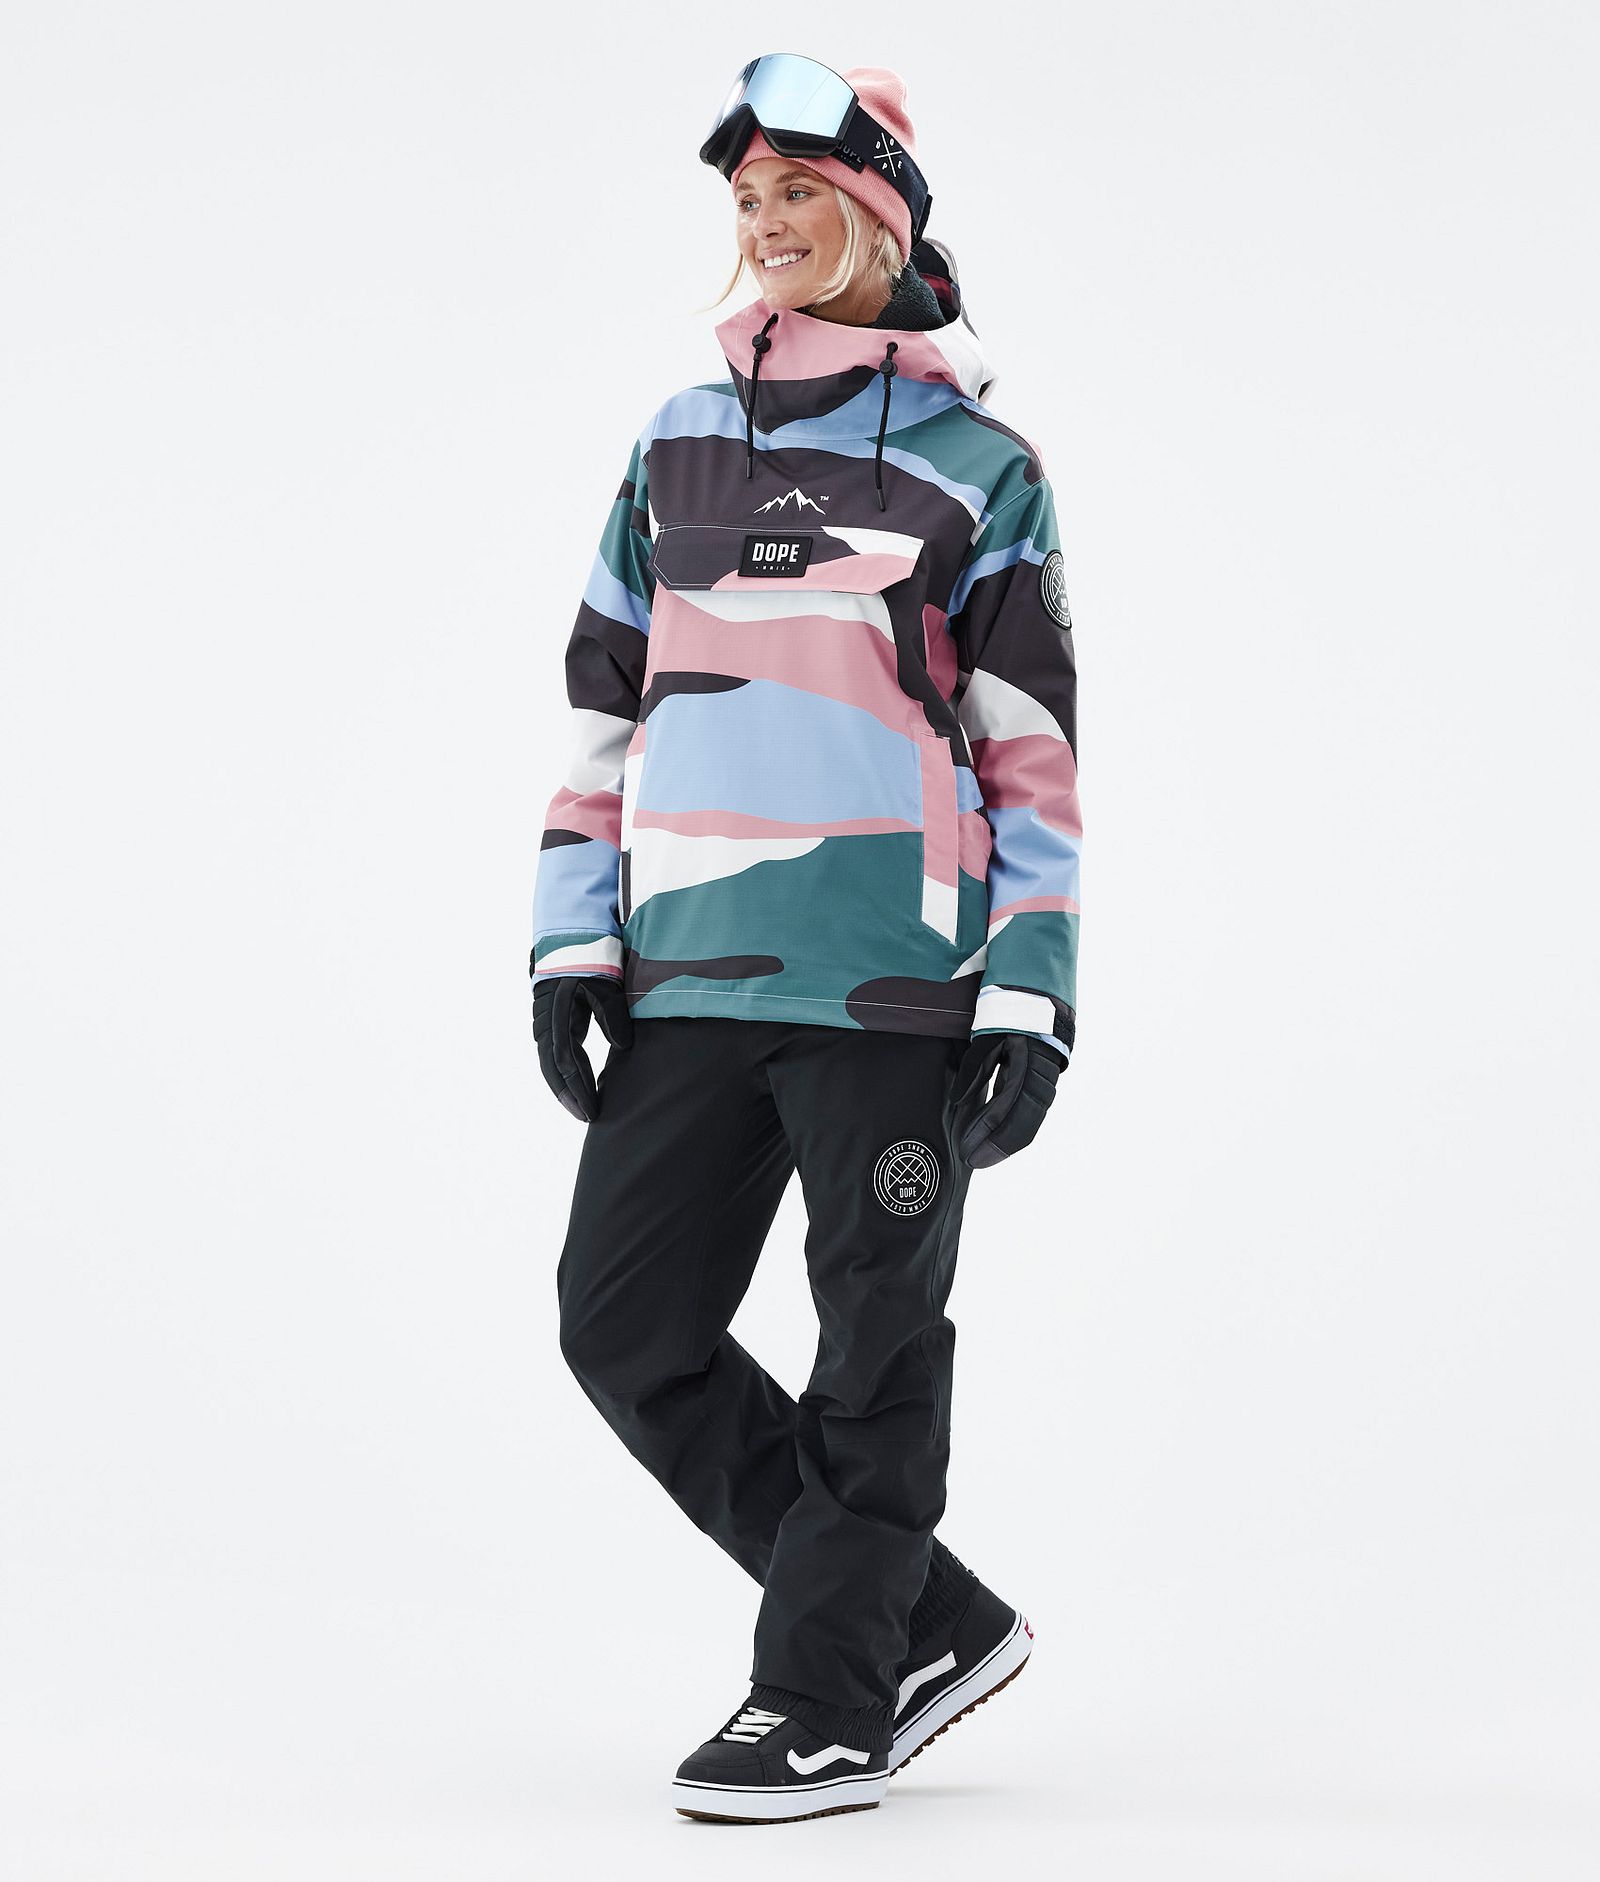 Dope Blizzard W 2022 Giacca Snowboard Donna Shards Light Blue Muted Pink, Immagine 3 di 9